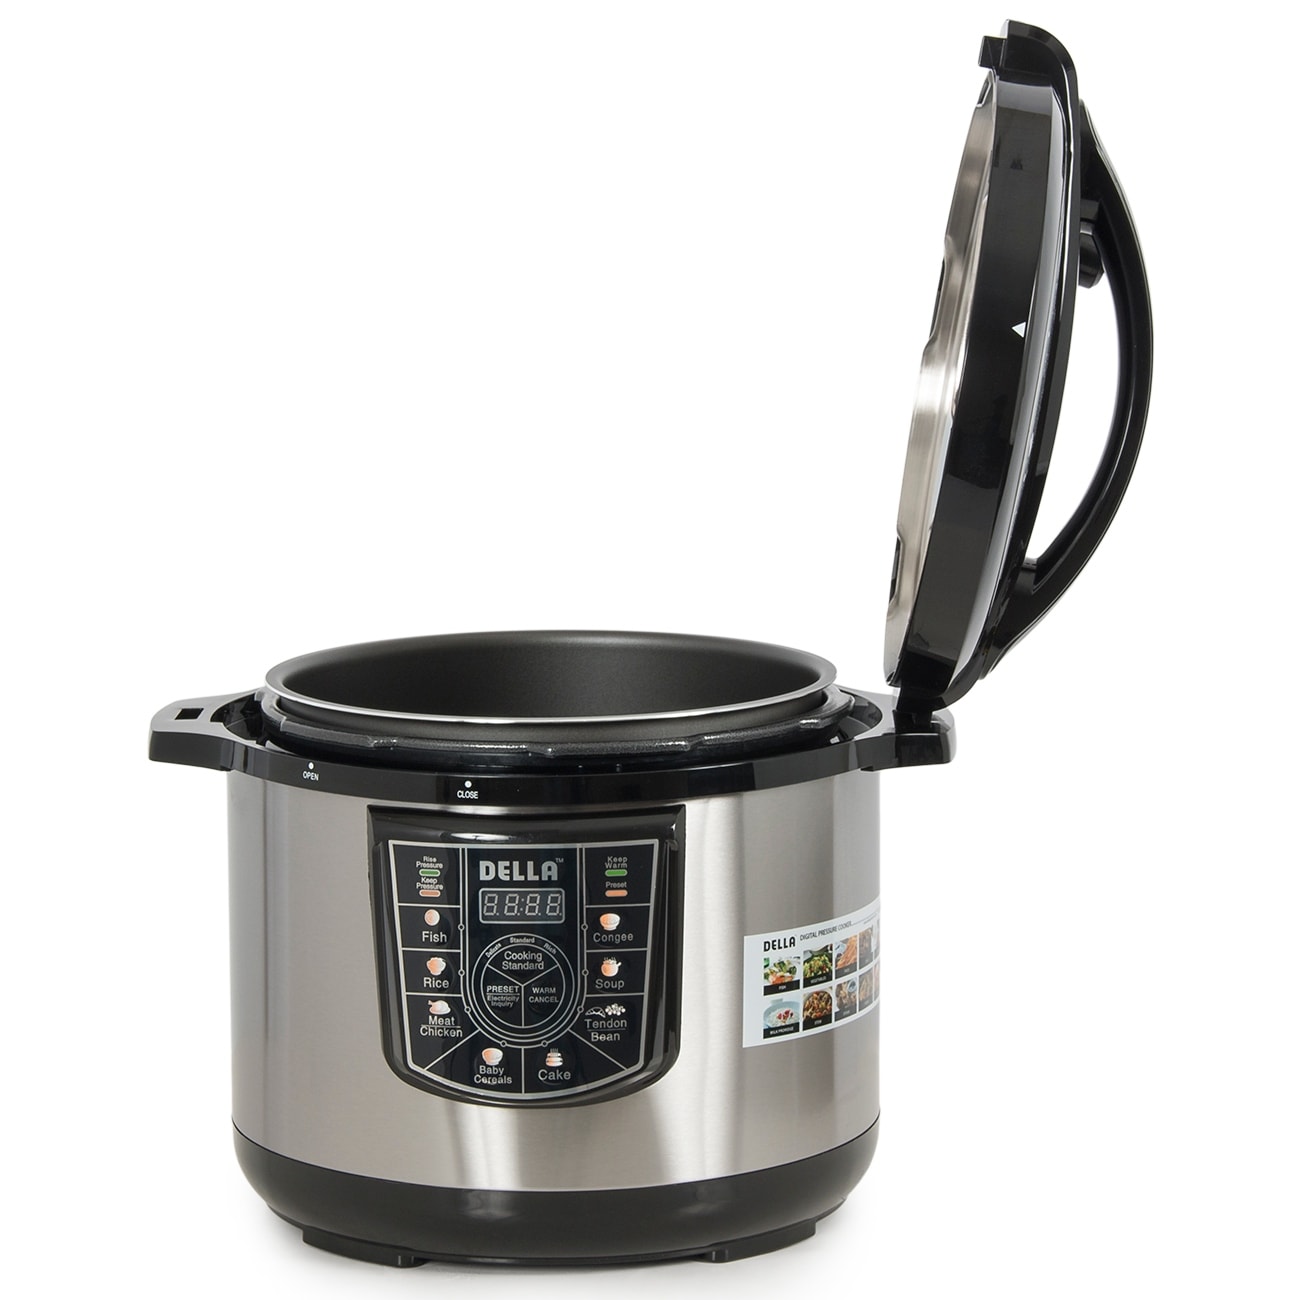 https://ak1.ostkcdn.com/images/products/is/images/direct/dbcdef3737763365b64f6eae48ff93346e7b9510/Della-8-in-1-Programmable-Electric-Pressure-Cooker-Stainless-Steel%2C-10-Quart-1400-Watt.jpg